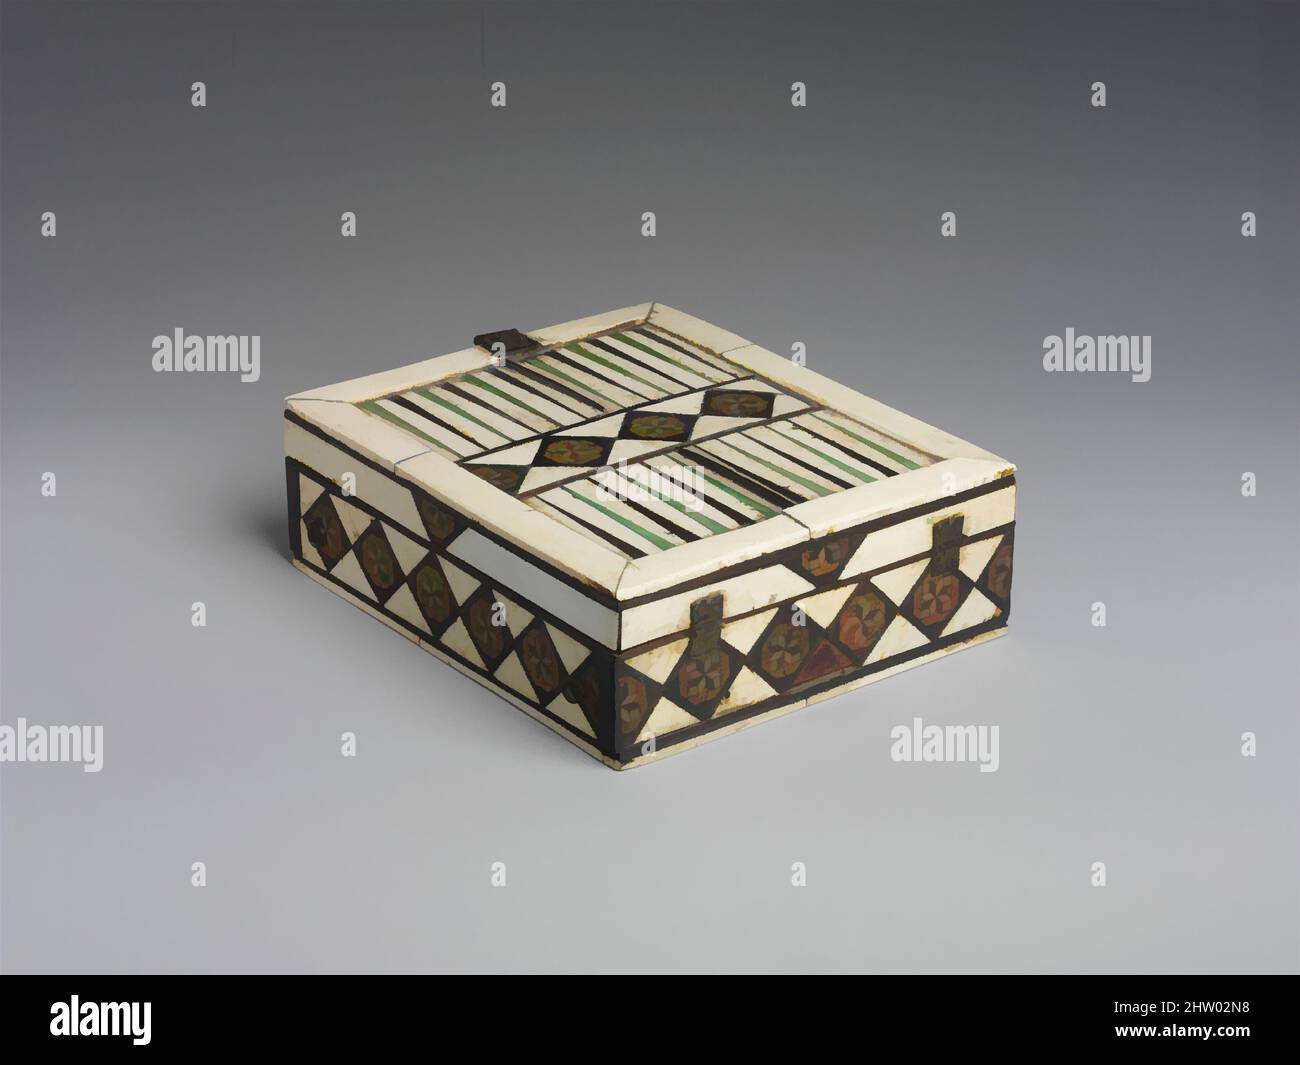 Art inspired by Game Box, 14th century, Italian, Bone, wood, stain over wood core with paper and textile lining, metal mounts, Overall: 2 11/16 x 7 11/16 x 6 5/16 in. (6.9 x 19.6 x 16.1 cm), Ivories-Bone, Bone and wood inlays embellish exterior of this wood box. The top is designed for, Classic works modernized by Artotop with a splash of modernity. Shapes, color and value, eye-catching visual impact on art. Emotions through freedom of artworks in a contemporary way. A timeless message pursuing a wildly creative new direction. Artists turning to the digital medium and creating the Artotop NFT Stock Photo